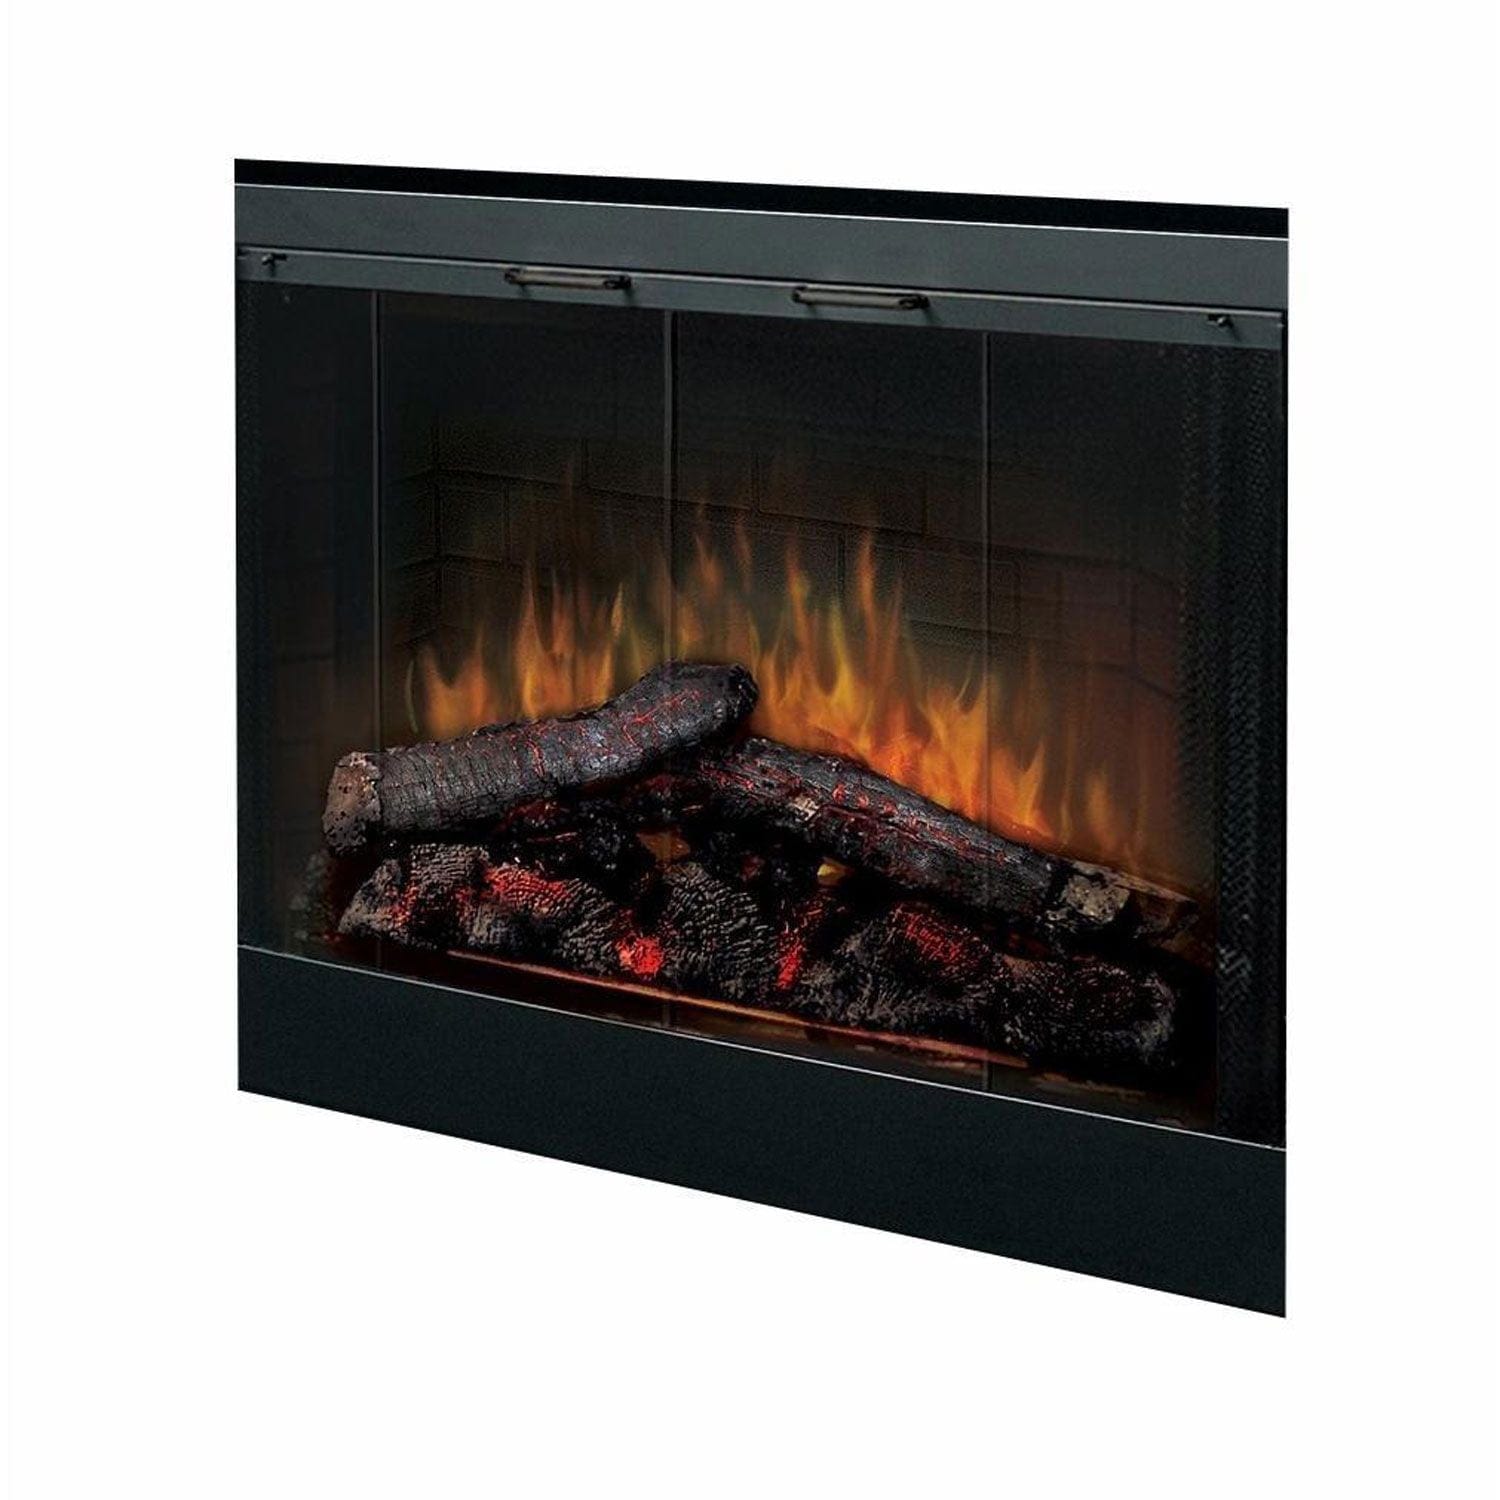 Dimplex BF39STP Standard Built-In Electric Fireplace Brick Effect, 39-Inch